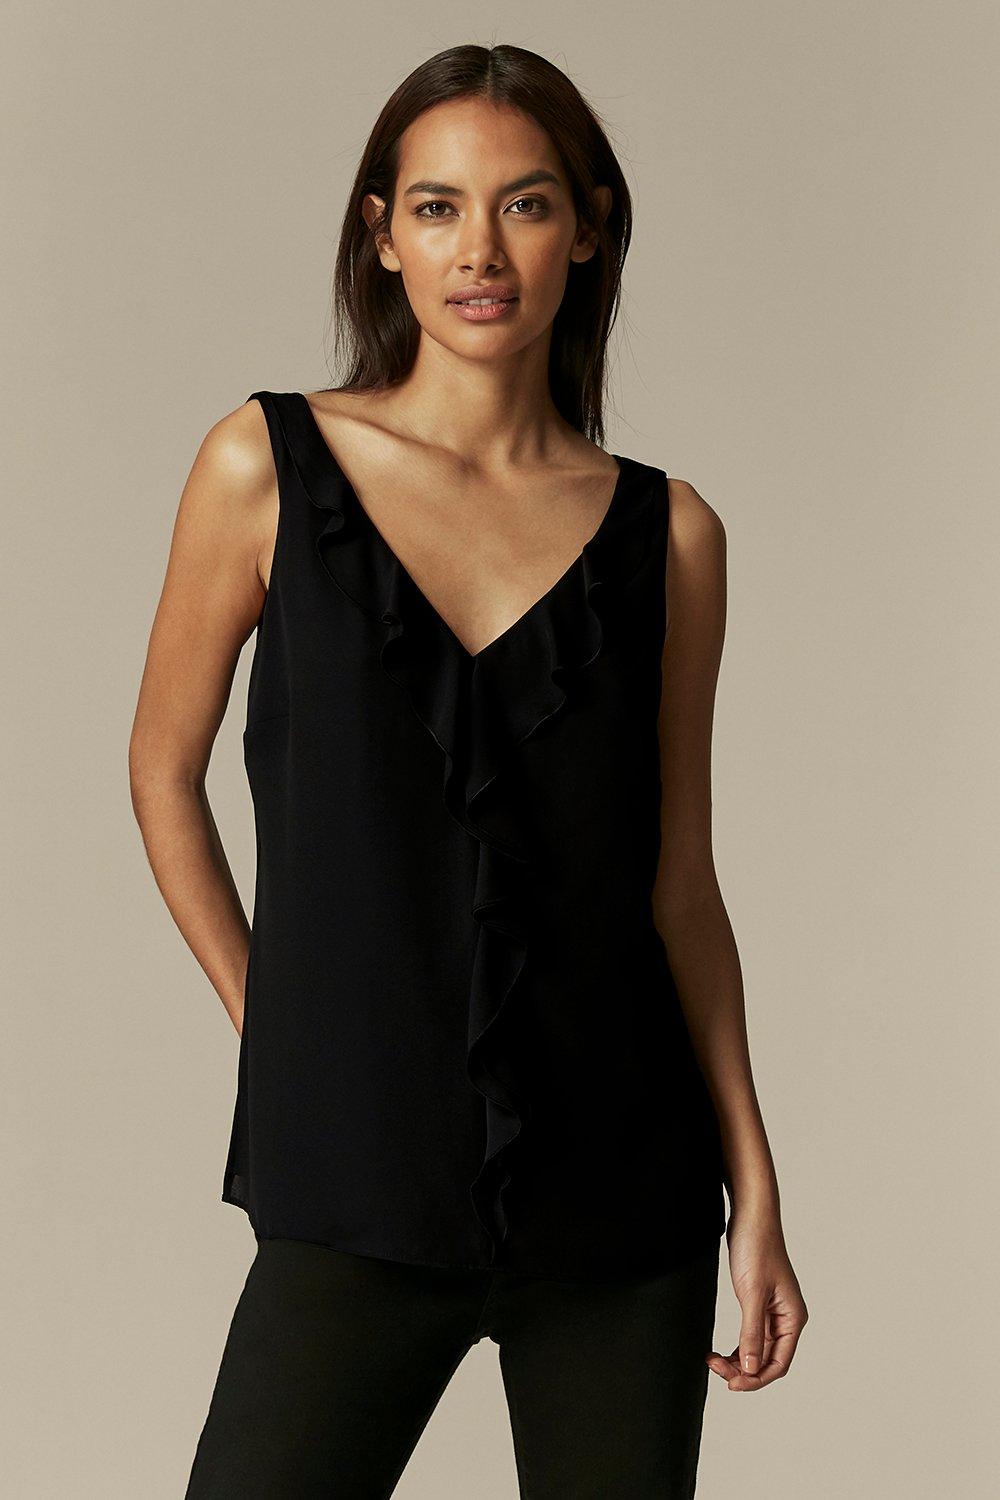 A Staple Black Camisole Top With An Extra Touch Of Style. Chic Ruffle Detailing Keeps This Top On-Trend, Whilst A Black Hue And Relaxed Fit Mean It'S Versatile And Flattering. For A Sleek & Evening Look, Wear With Black Tapered Trousers And Metallic Heels